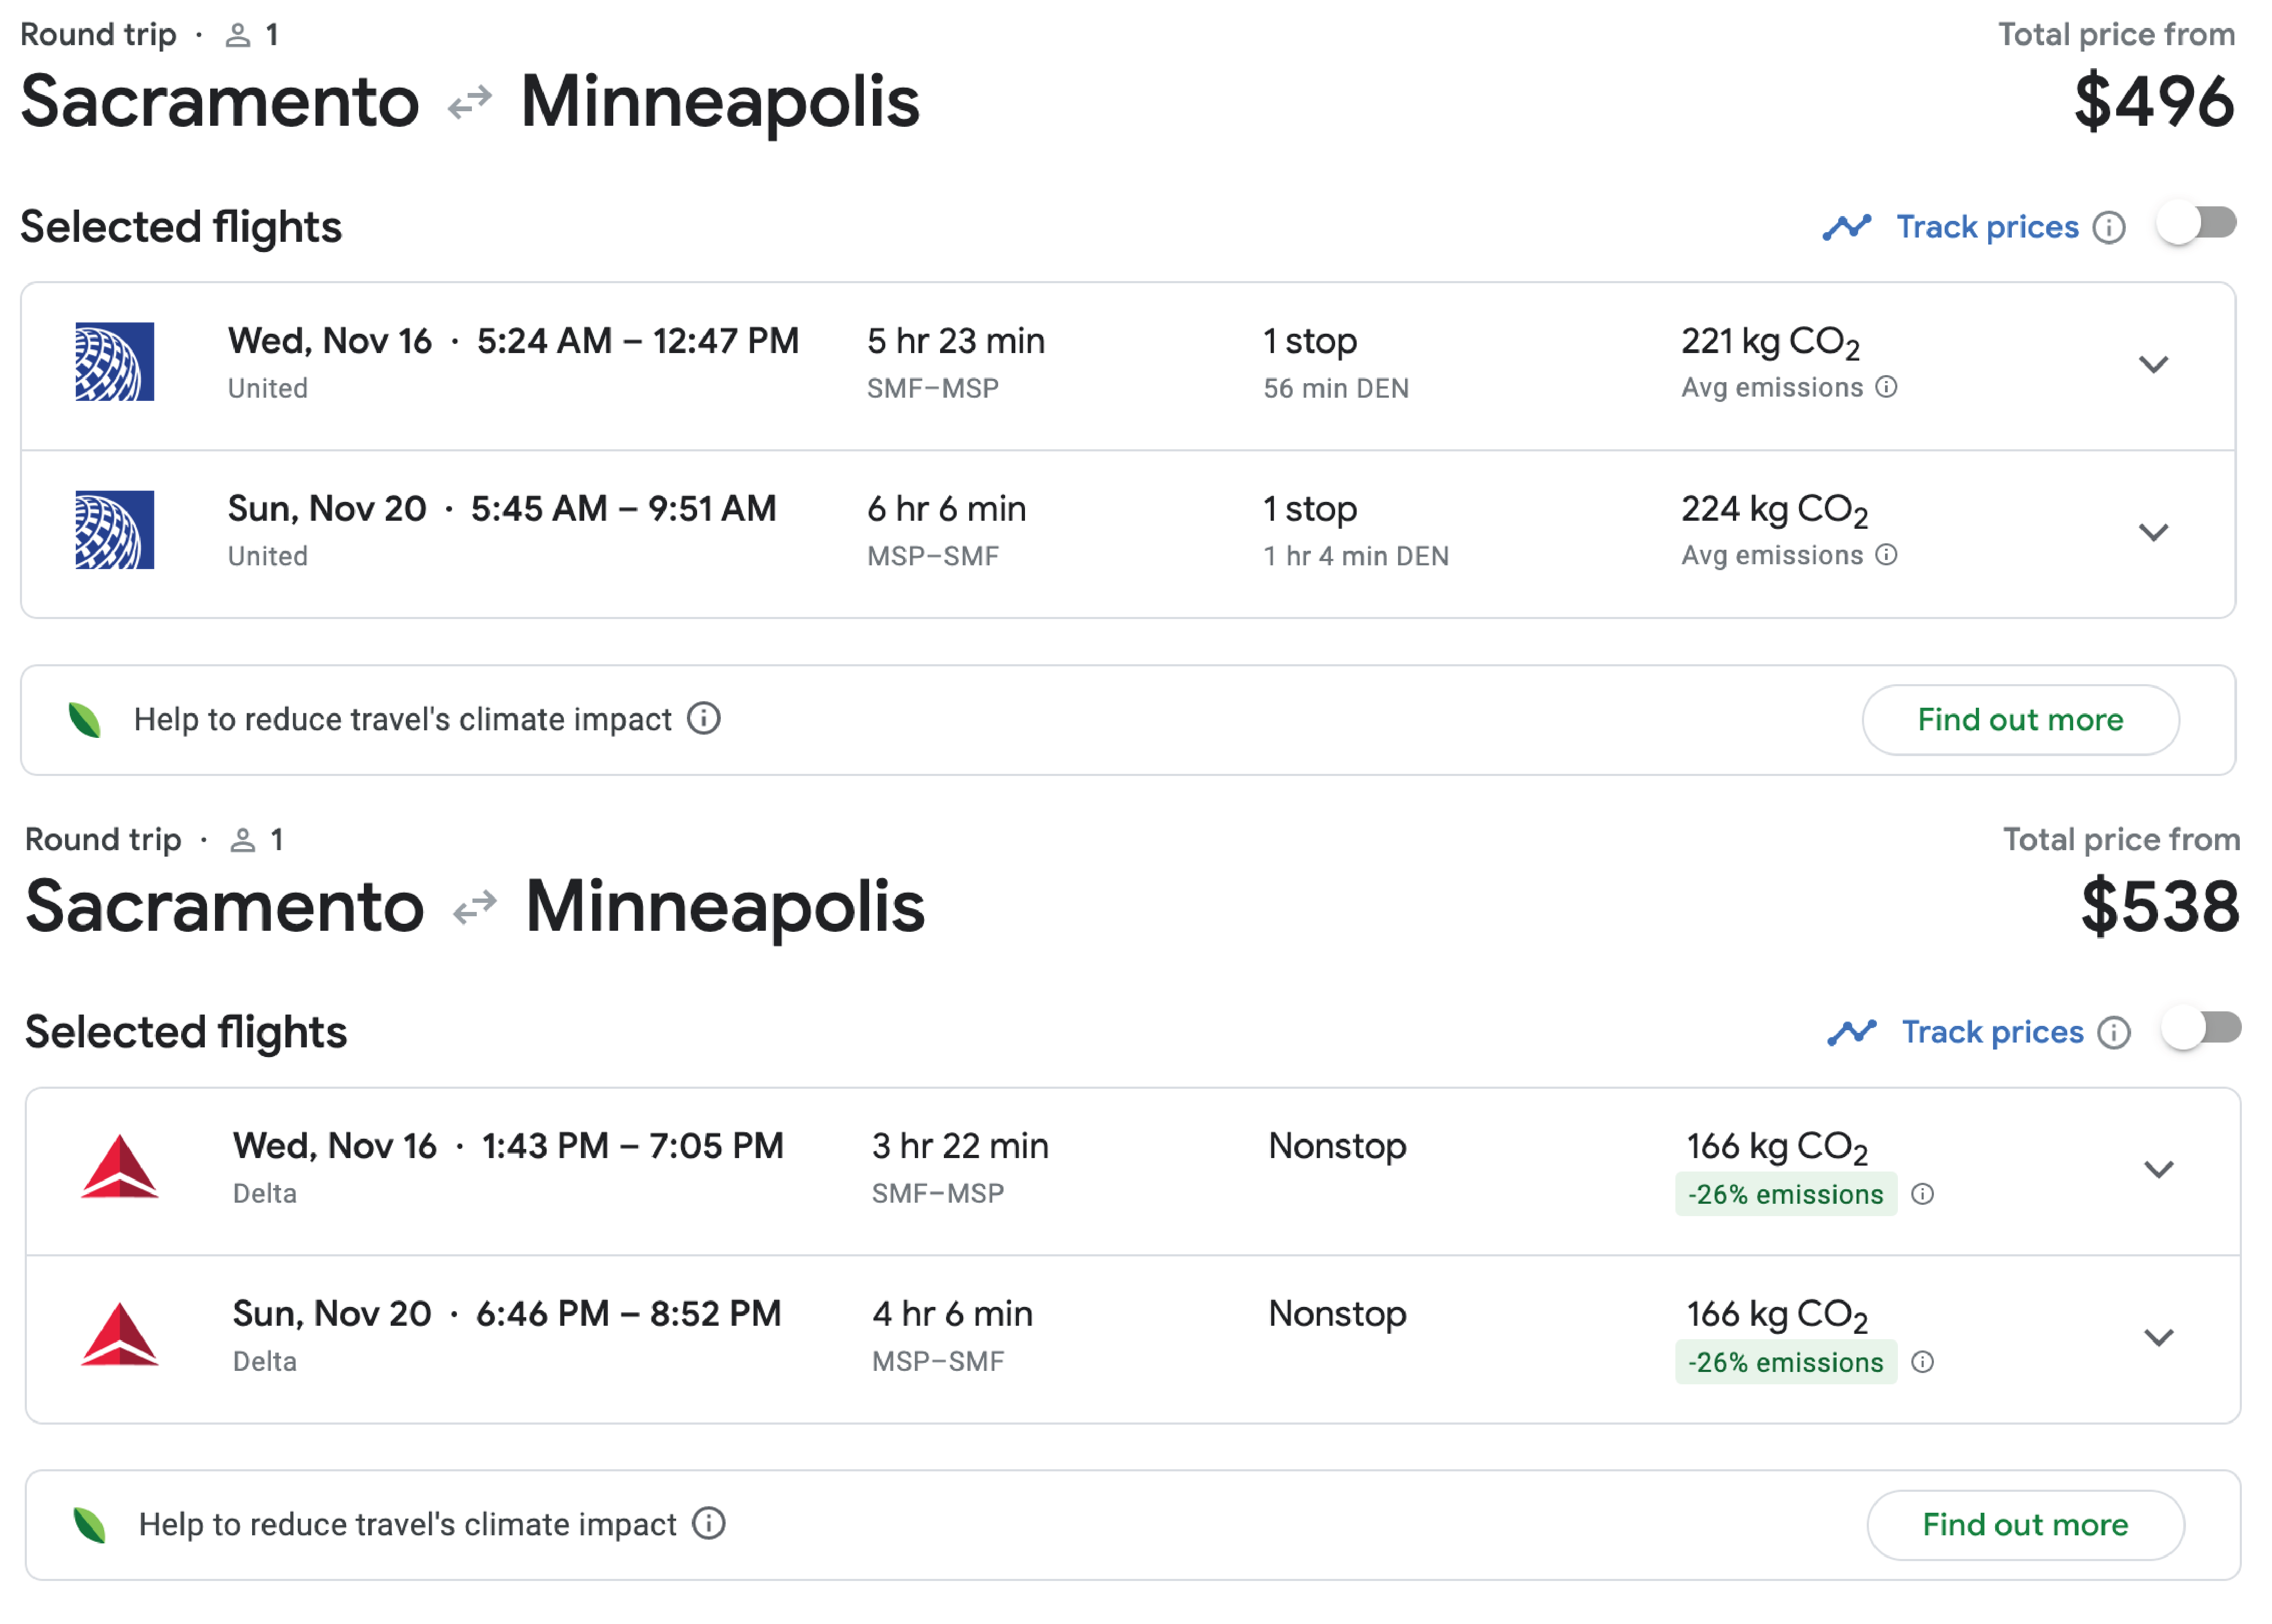 Search results for a direct flight and layover flight from Sacramento to Minneapolis.